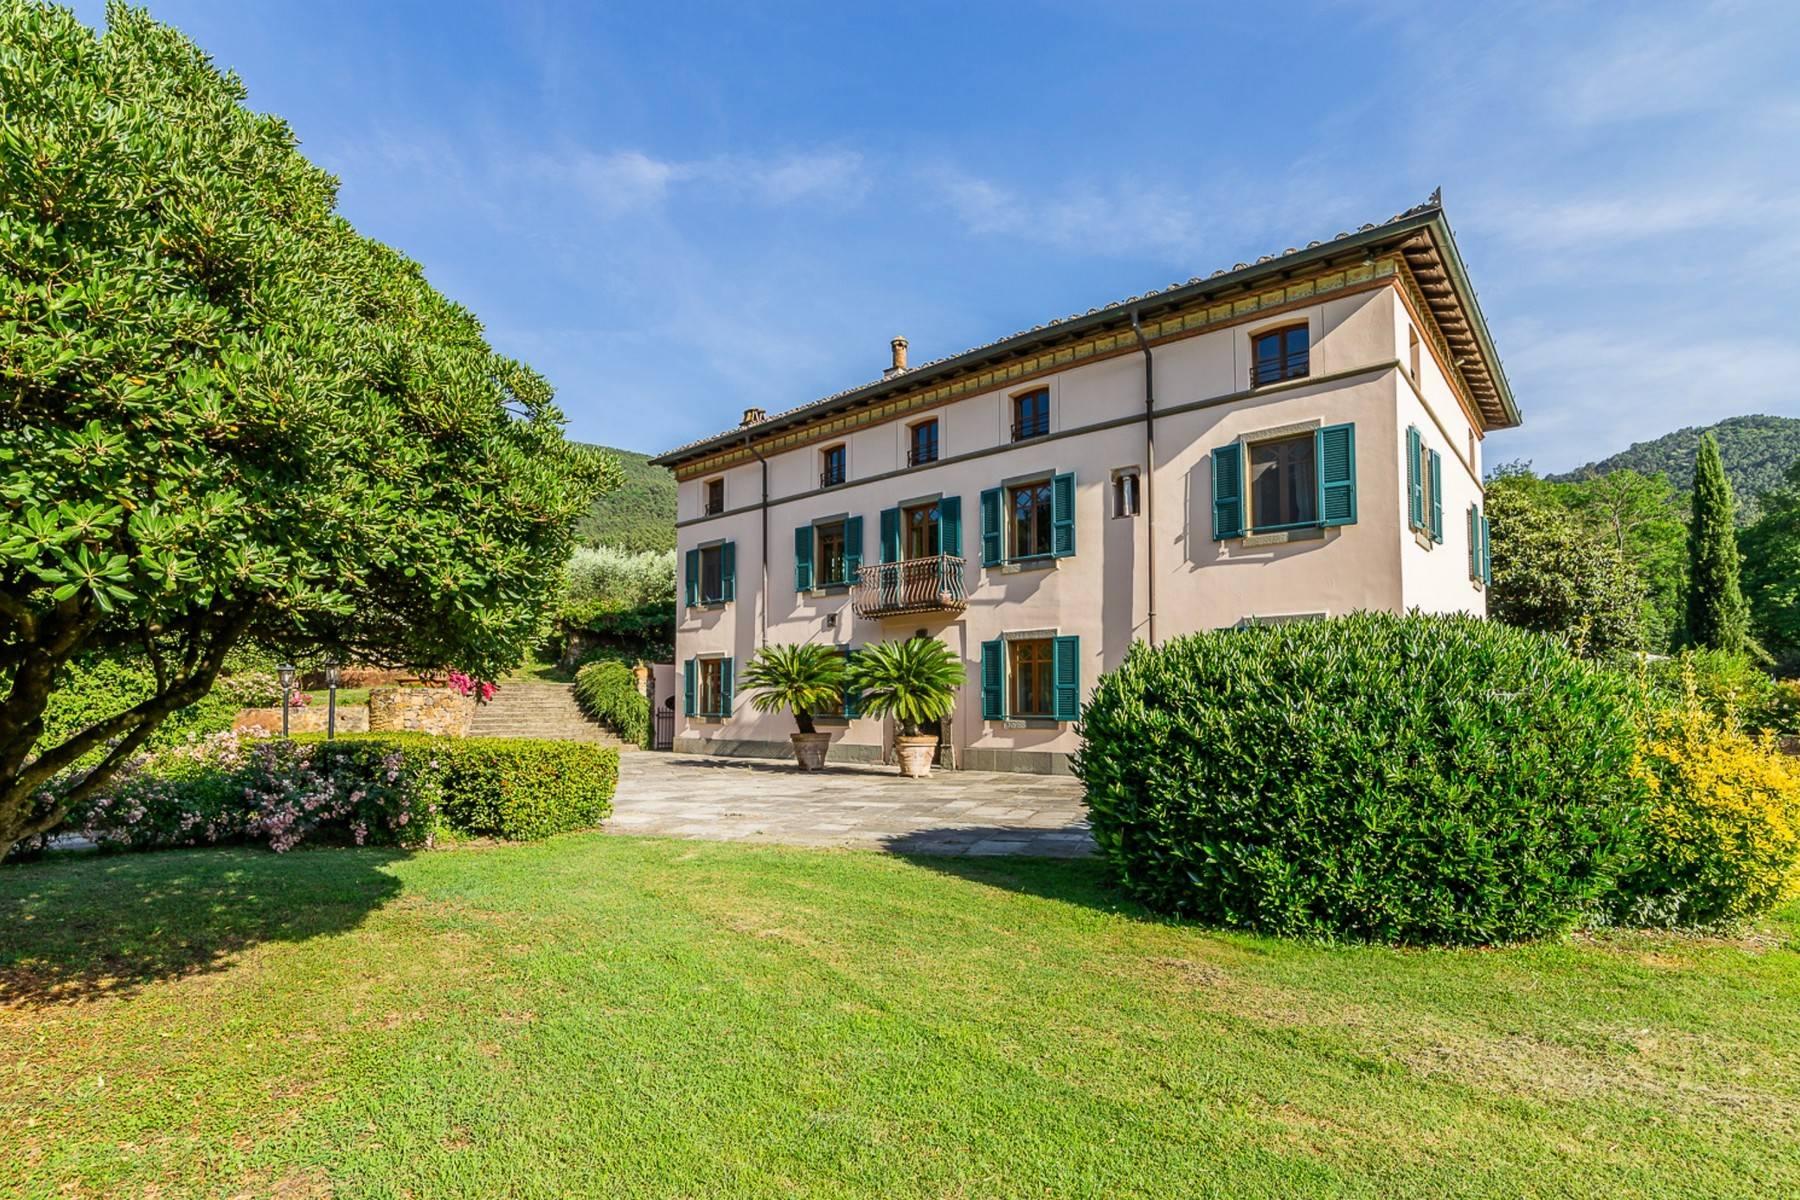 Majestic Luxury Villa with outbuildings on the hills of Lucca - 5